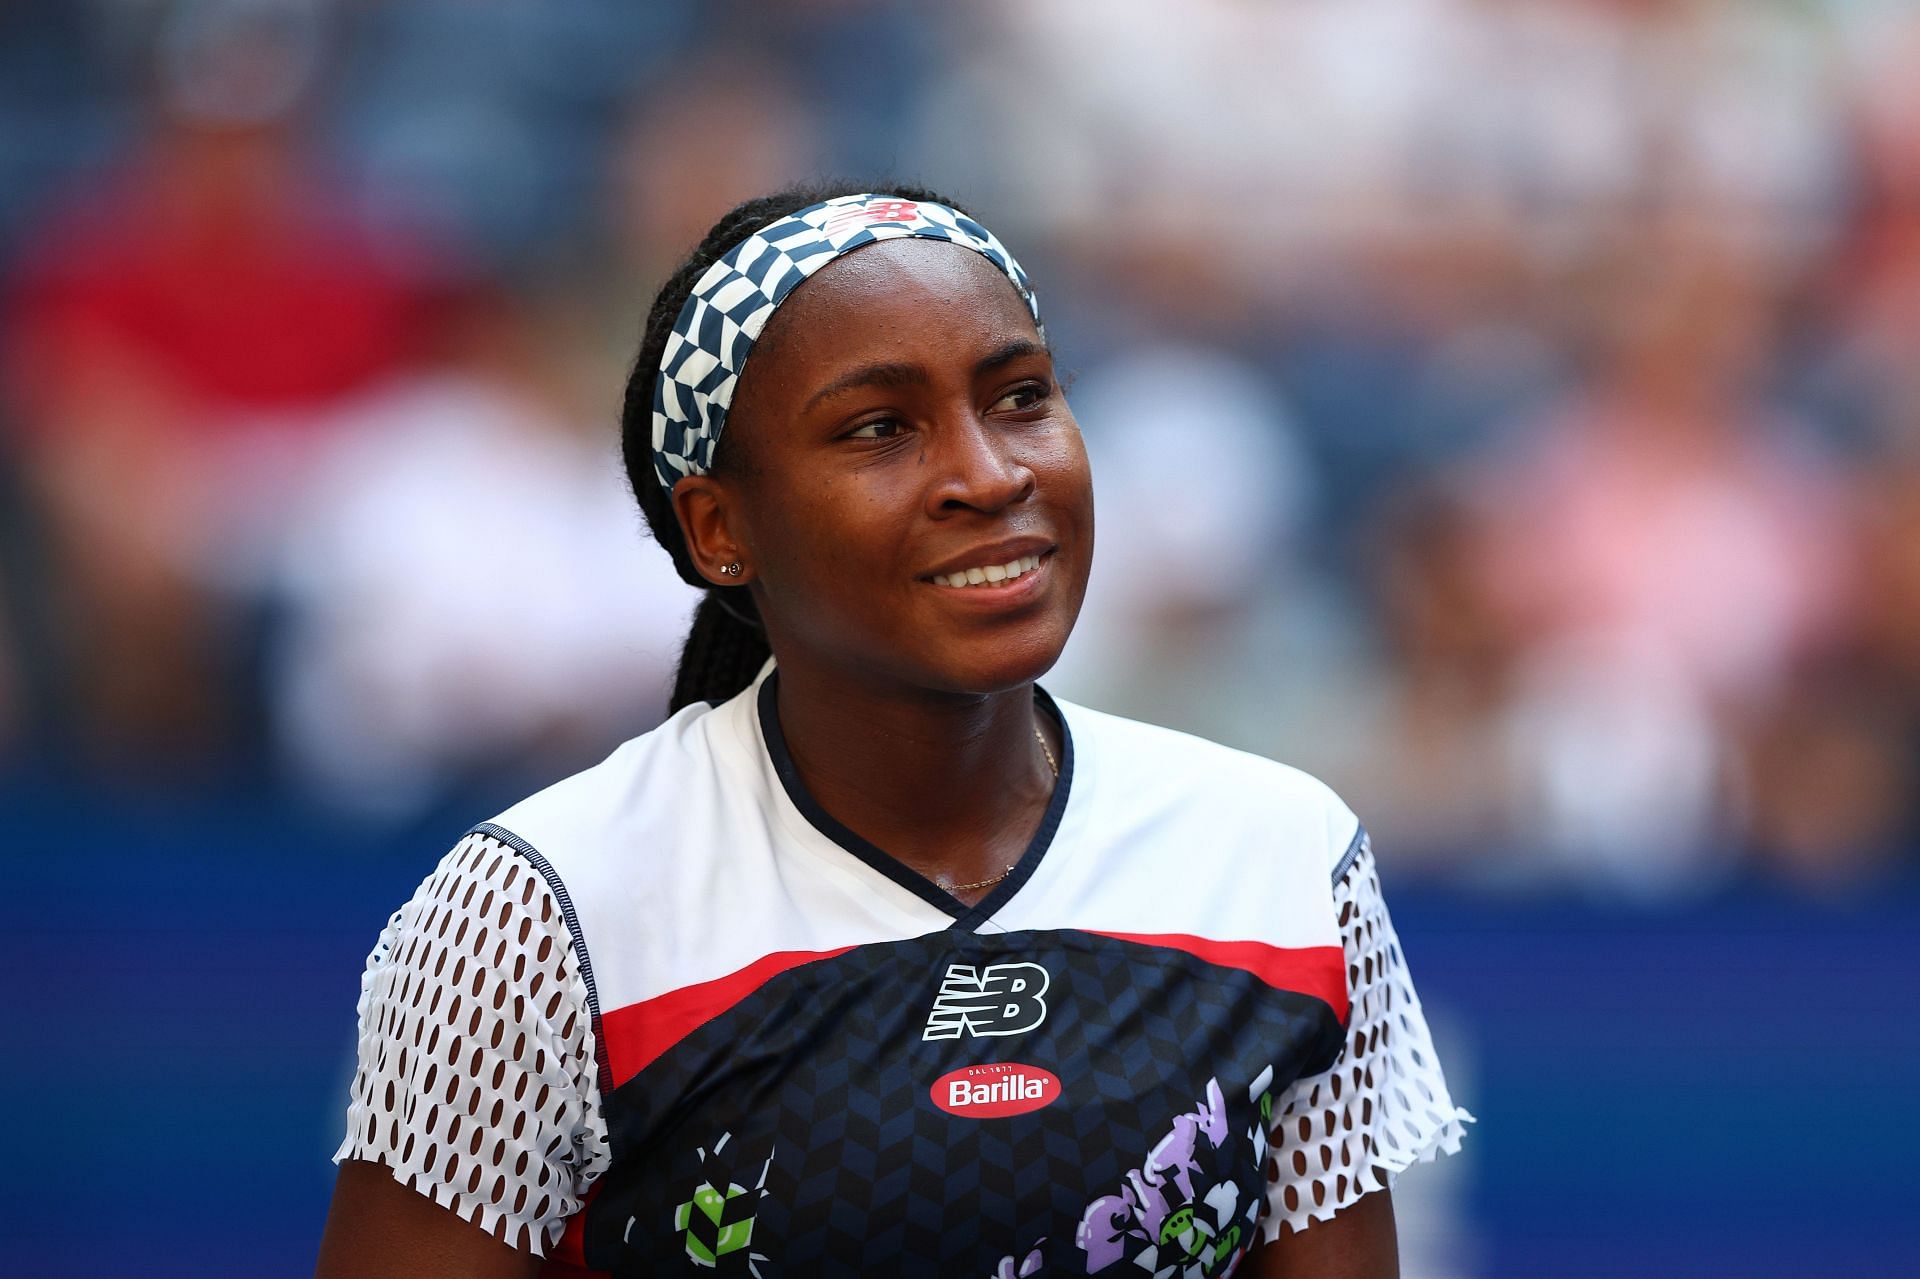 Coco Gauff is gunning for her first title of the year at the San Diego Open.